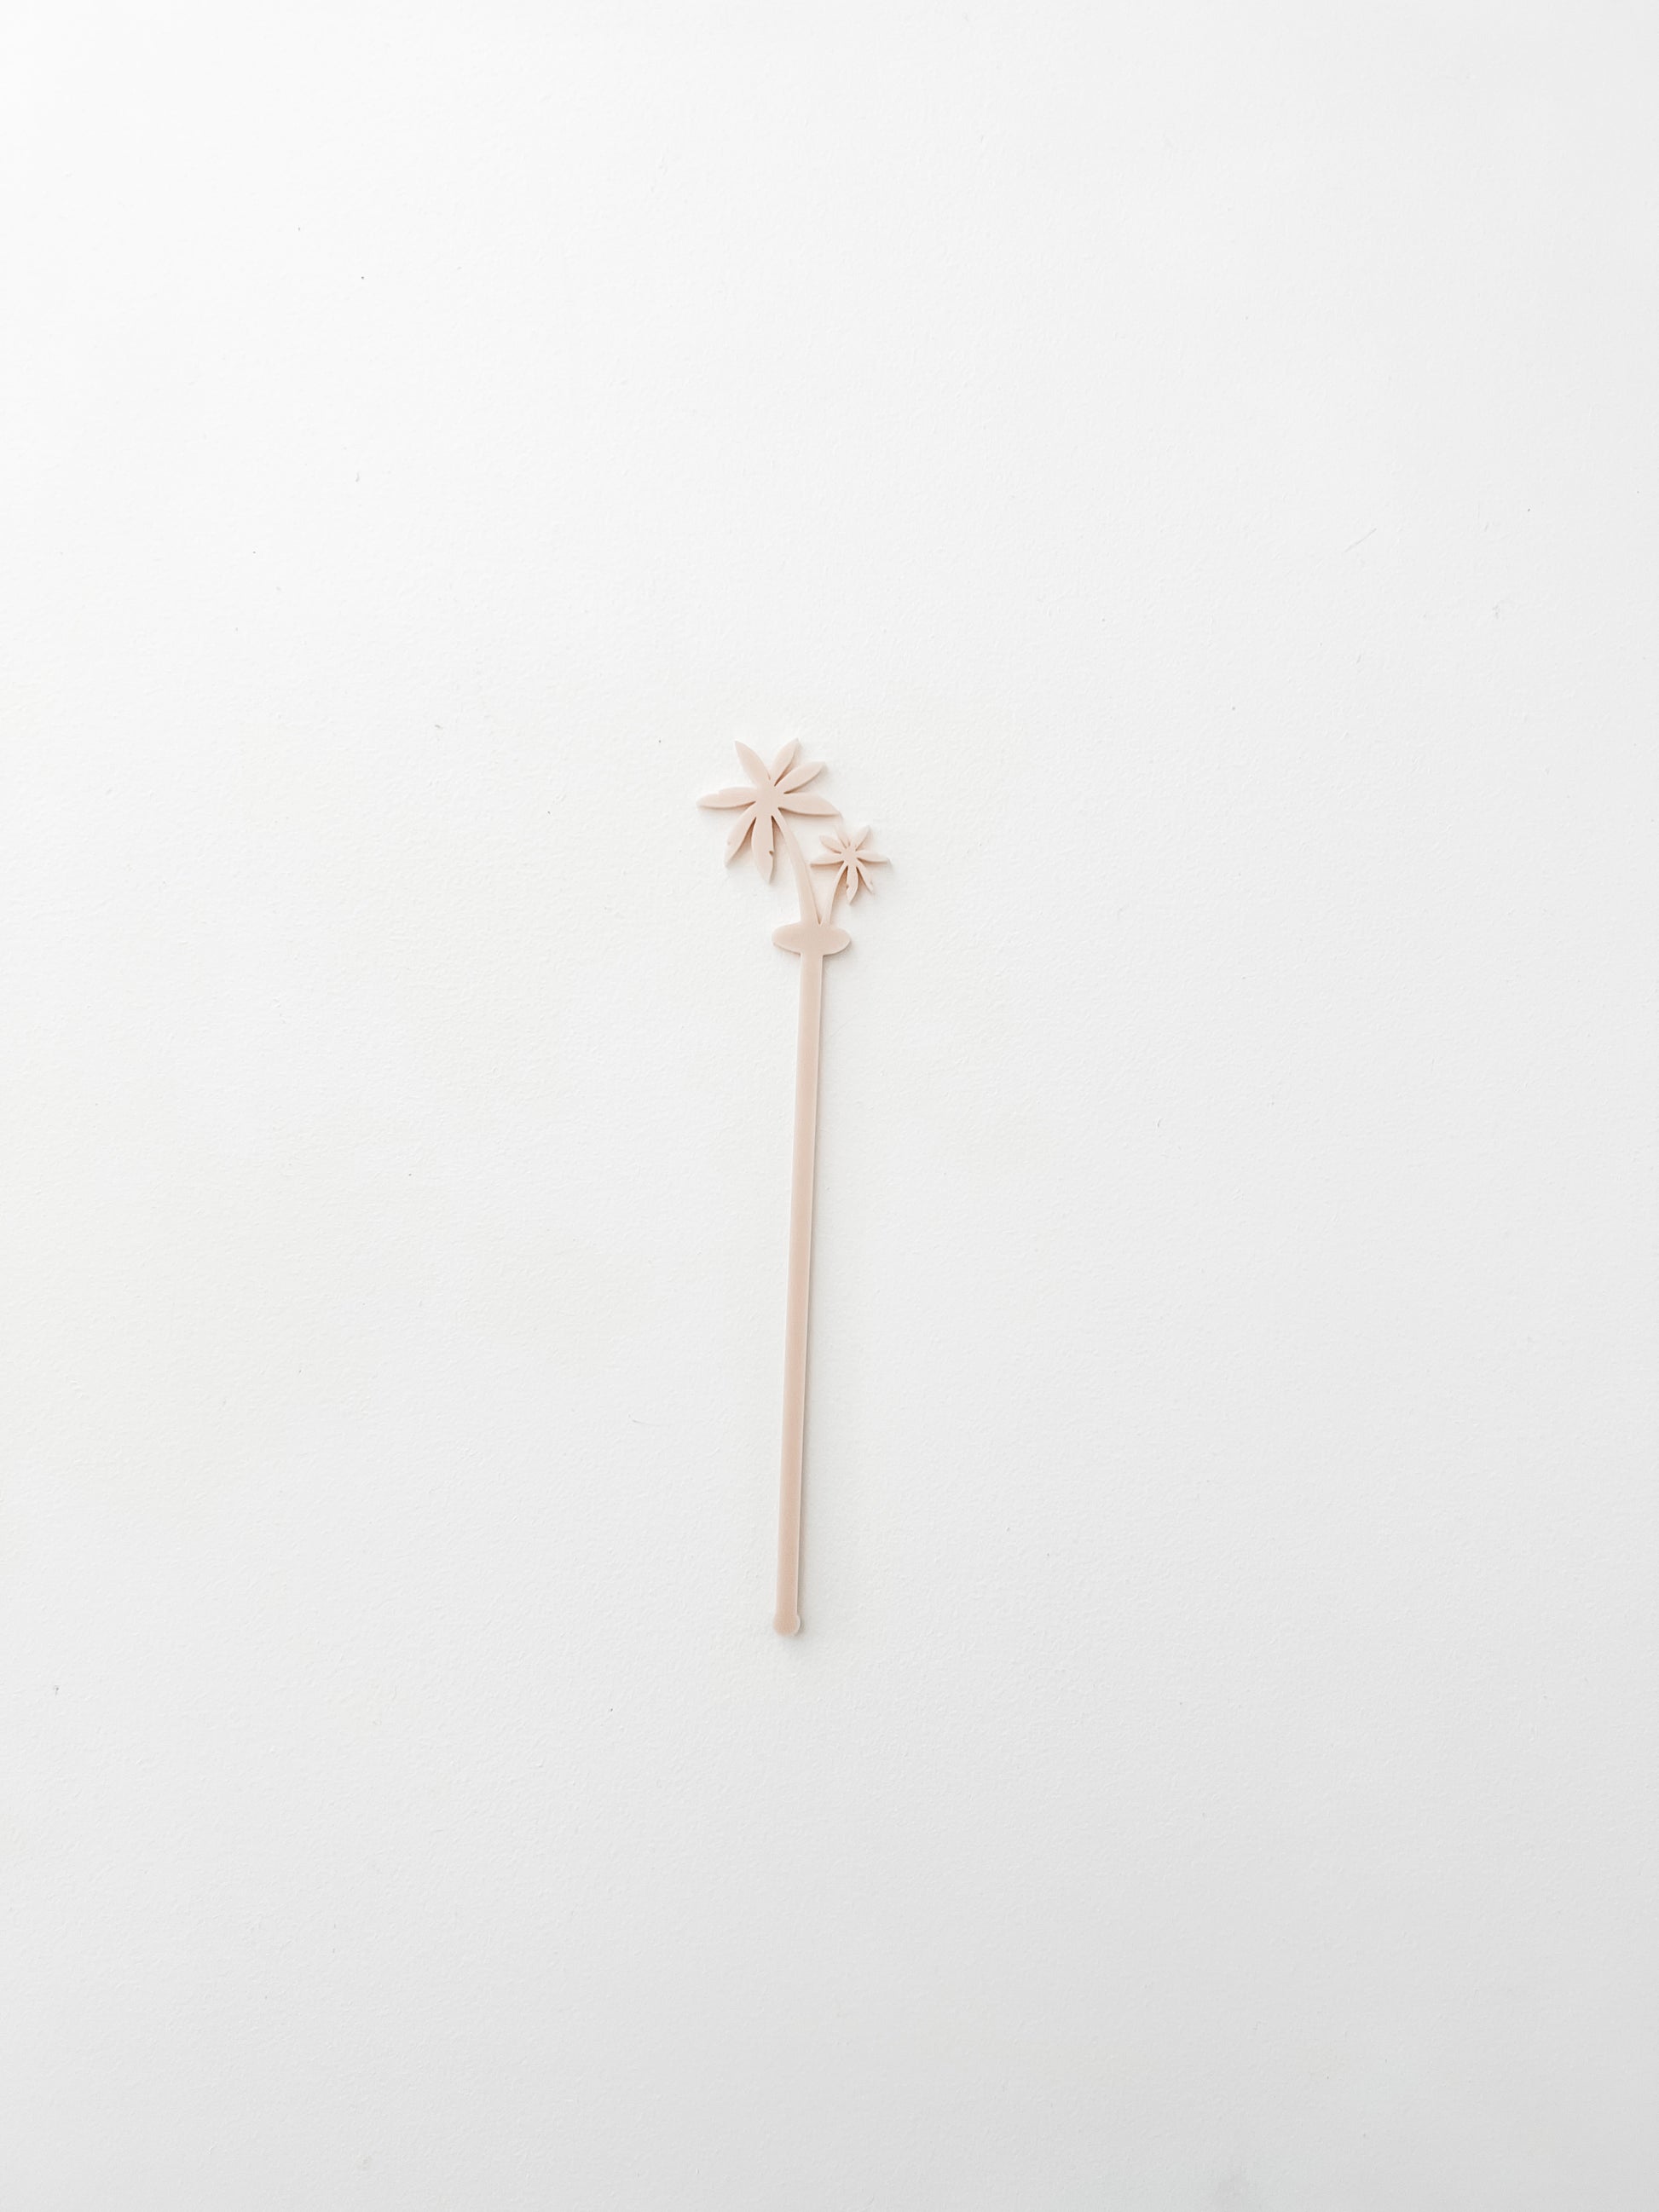 drink stirrers swizzle sticks heart, plane, palm tree and shell